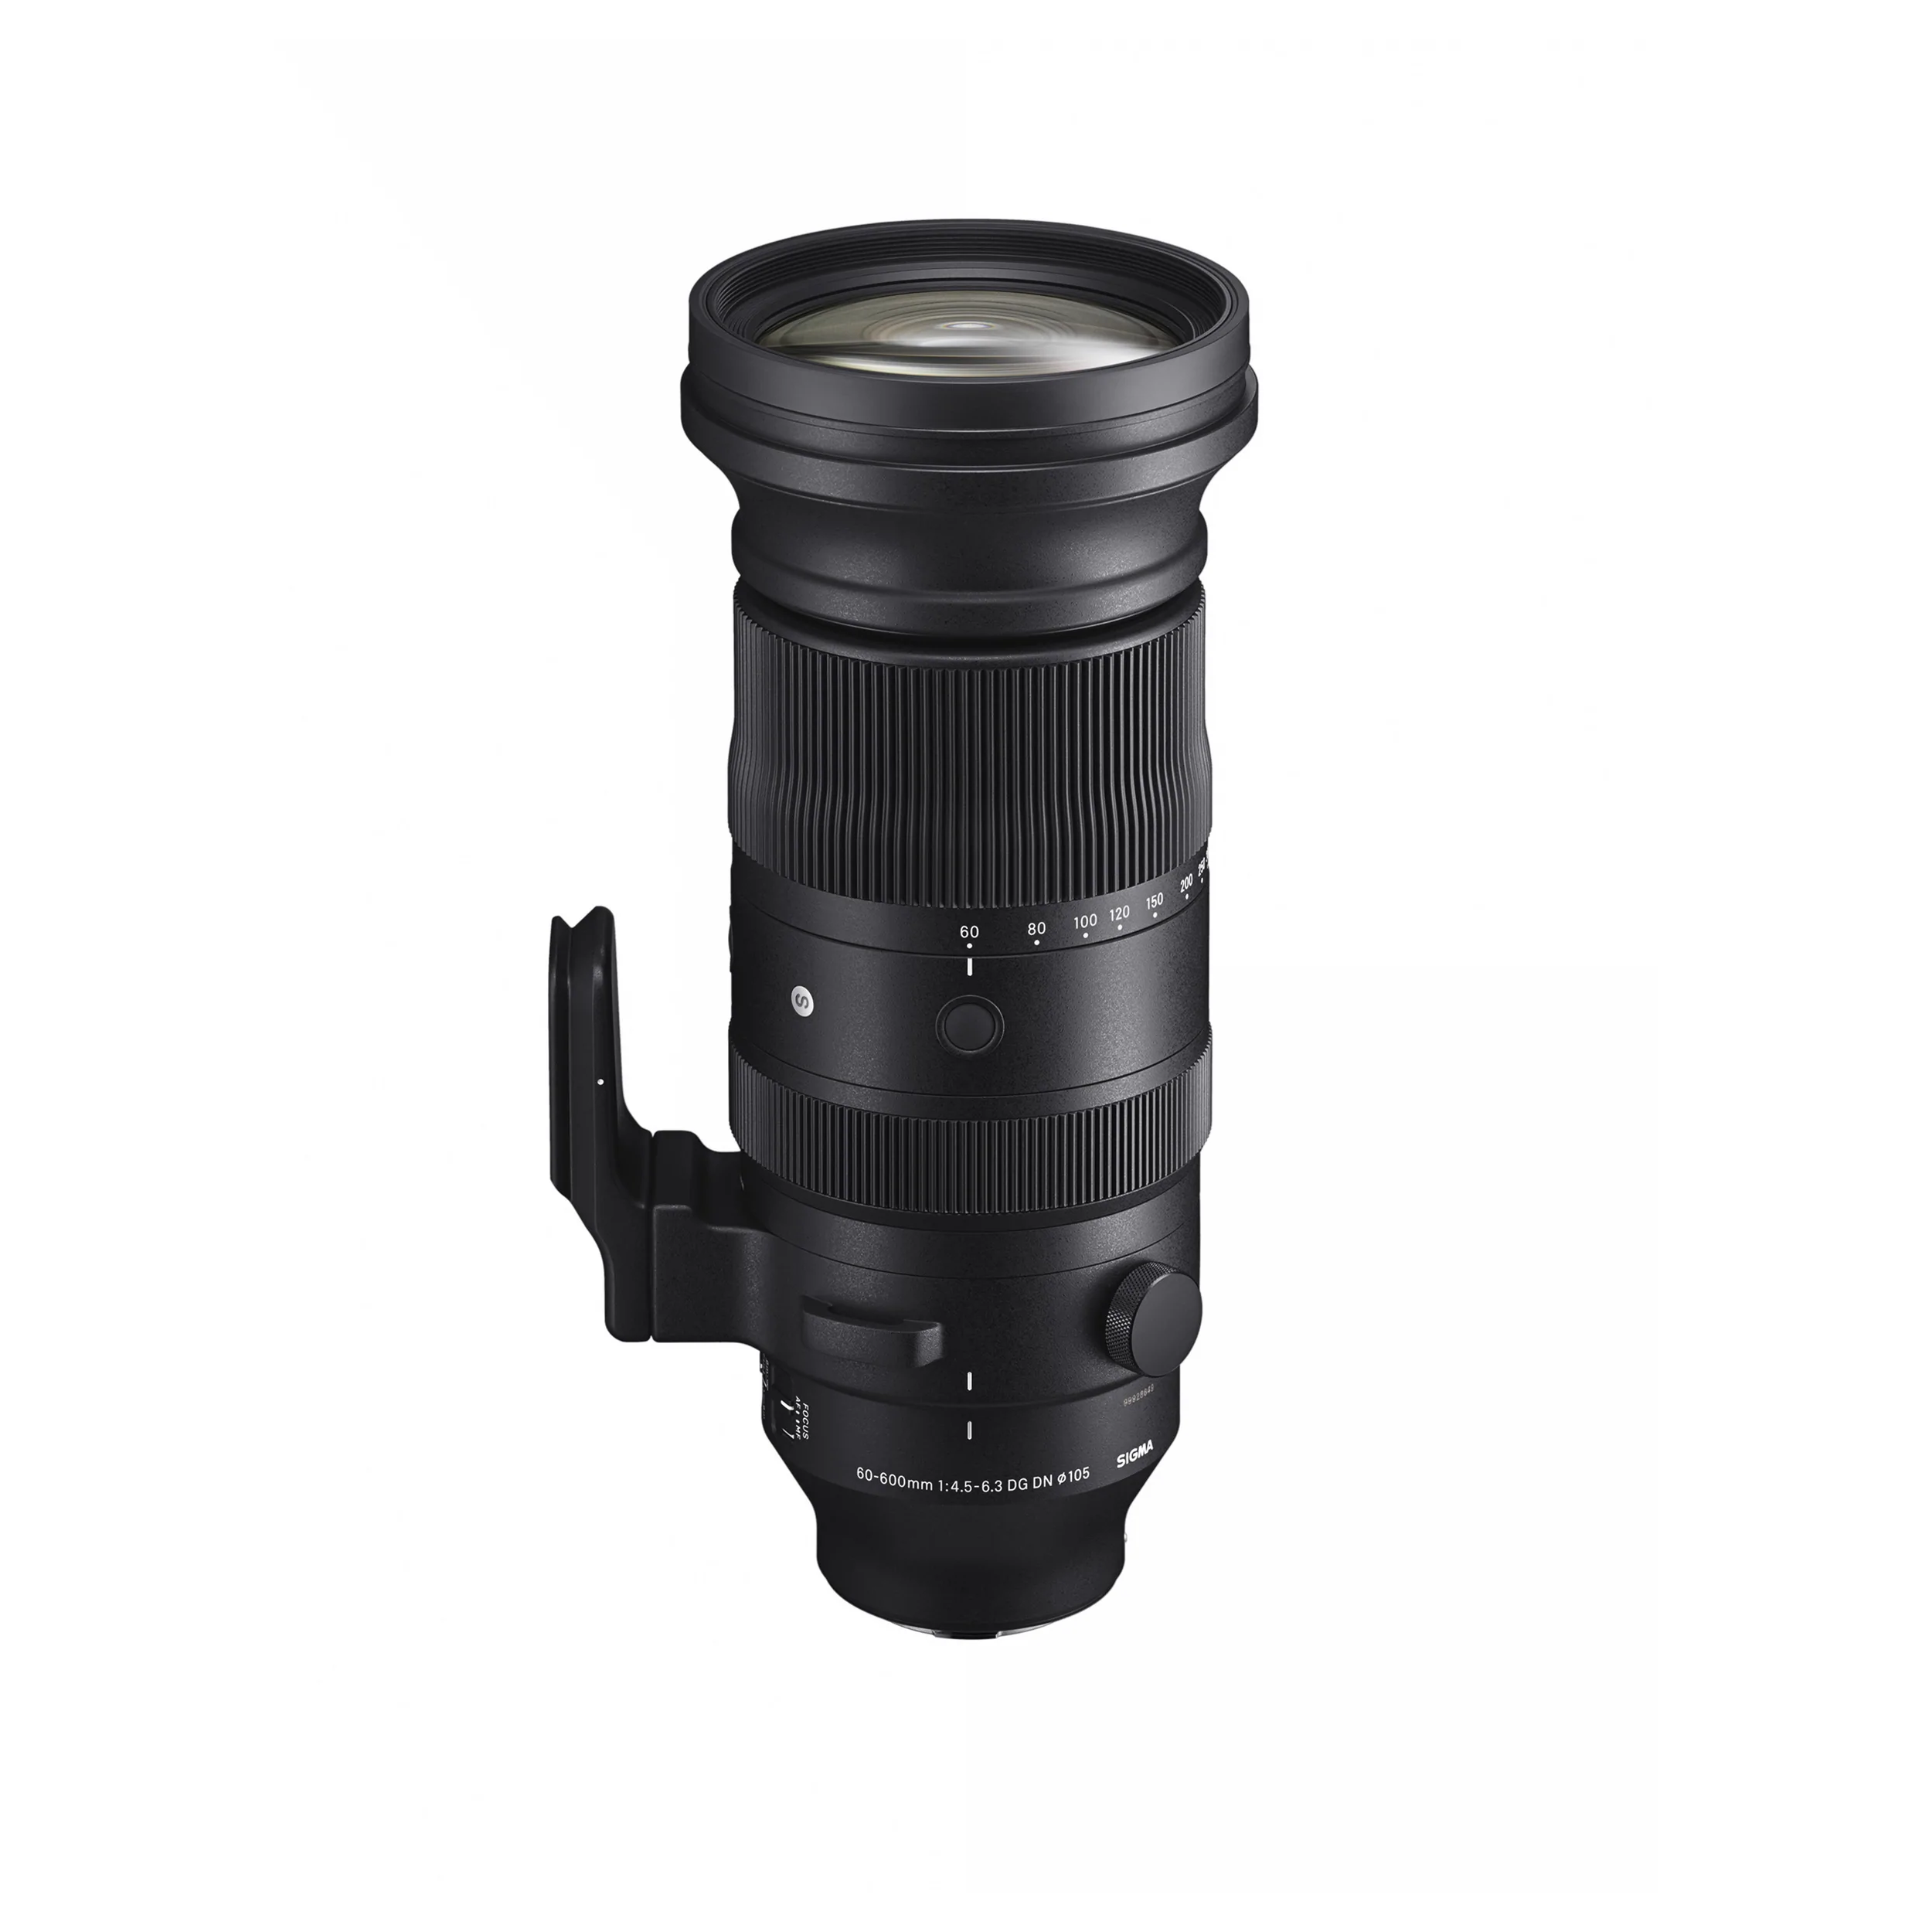 Sigma 60-600mm F4.5-6.3 DG DN OS Sports Lens for Sony E Mount